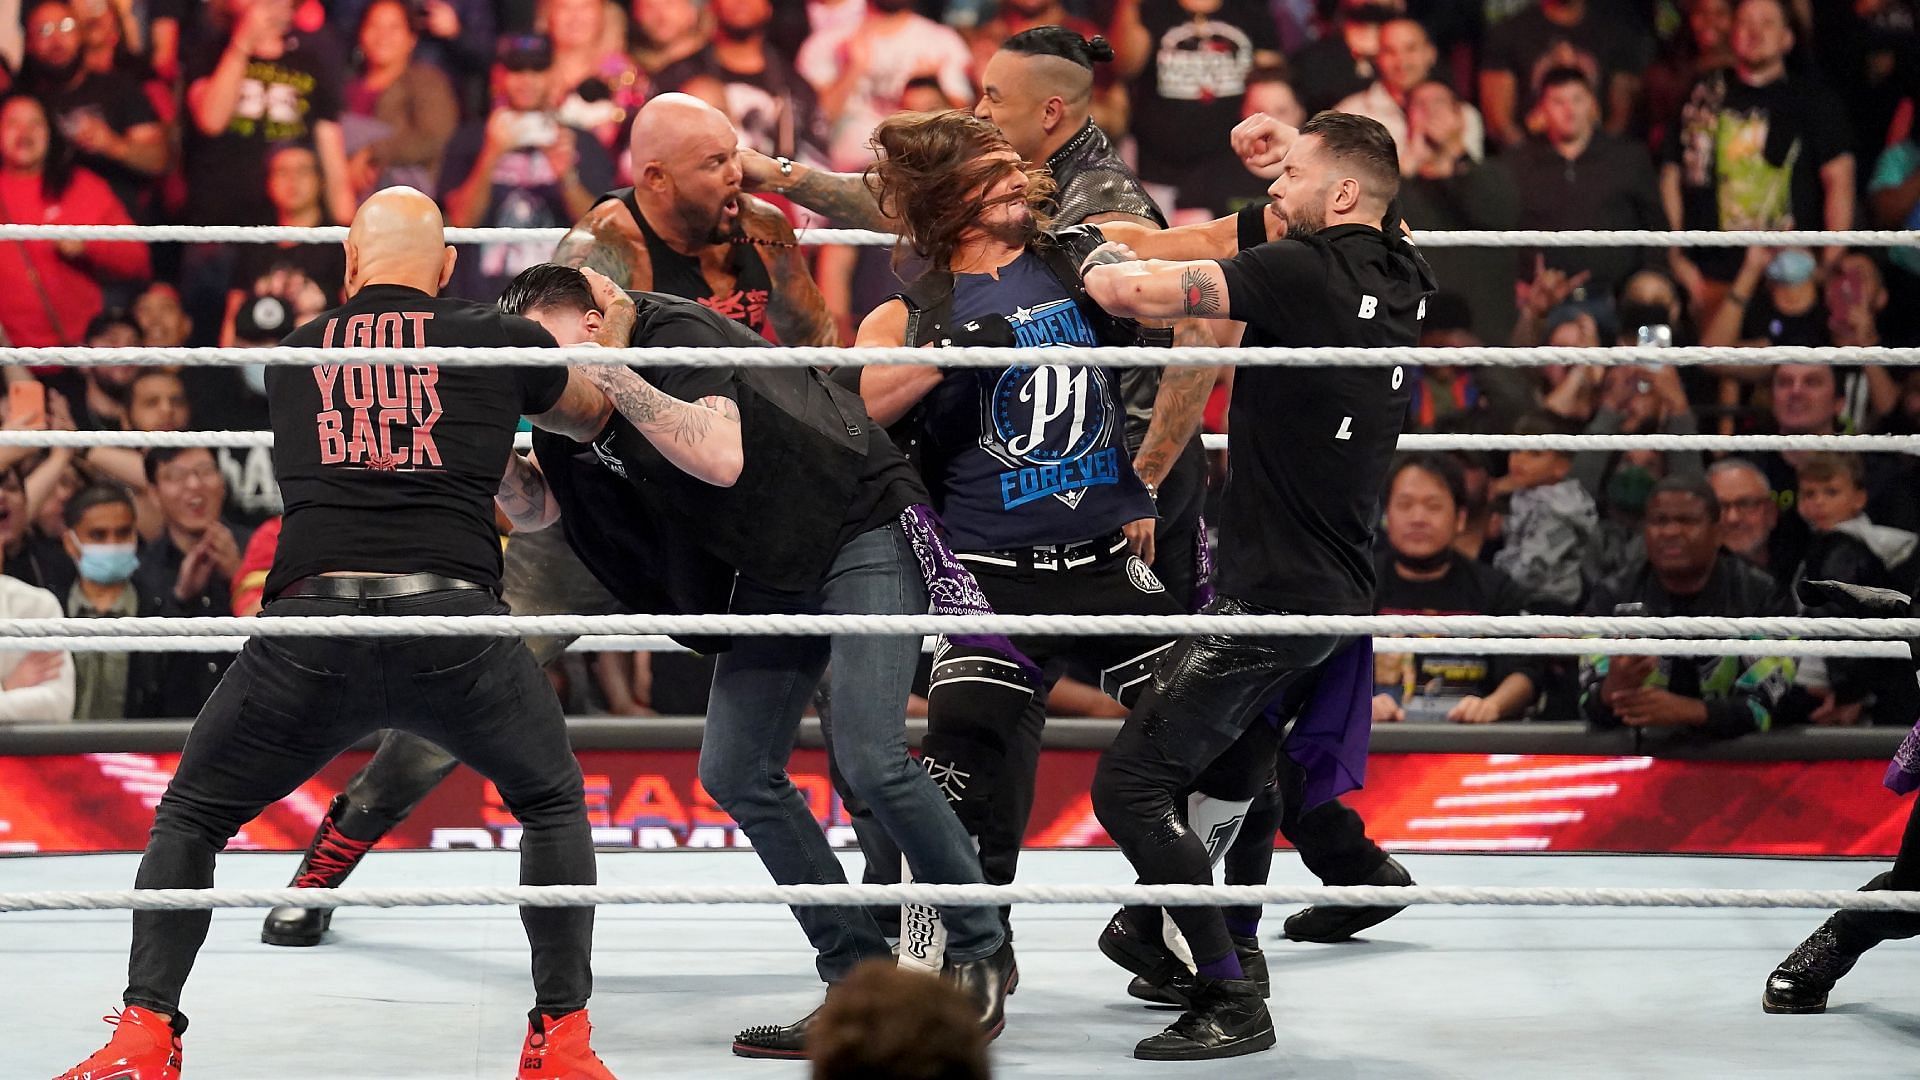 The O.C. in battle on RAW